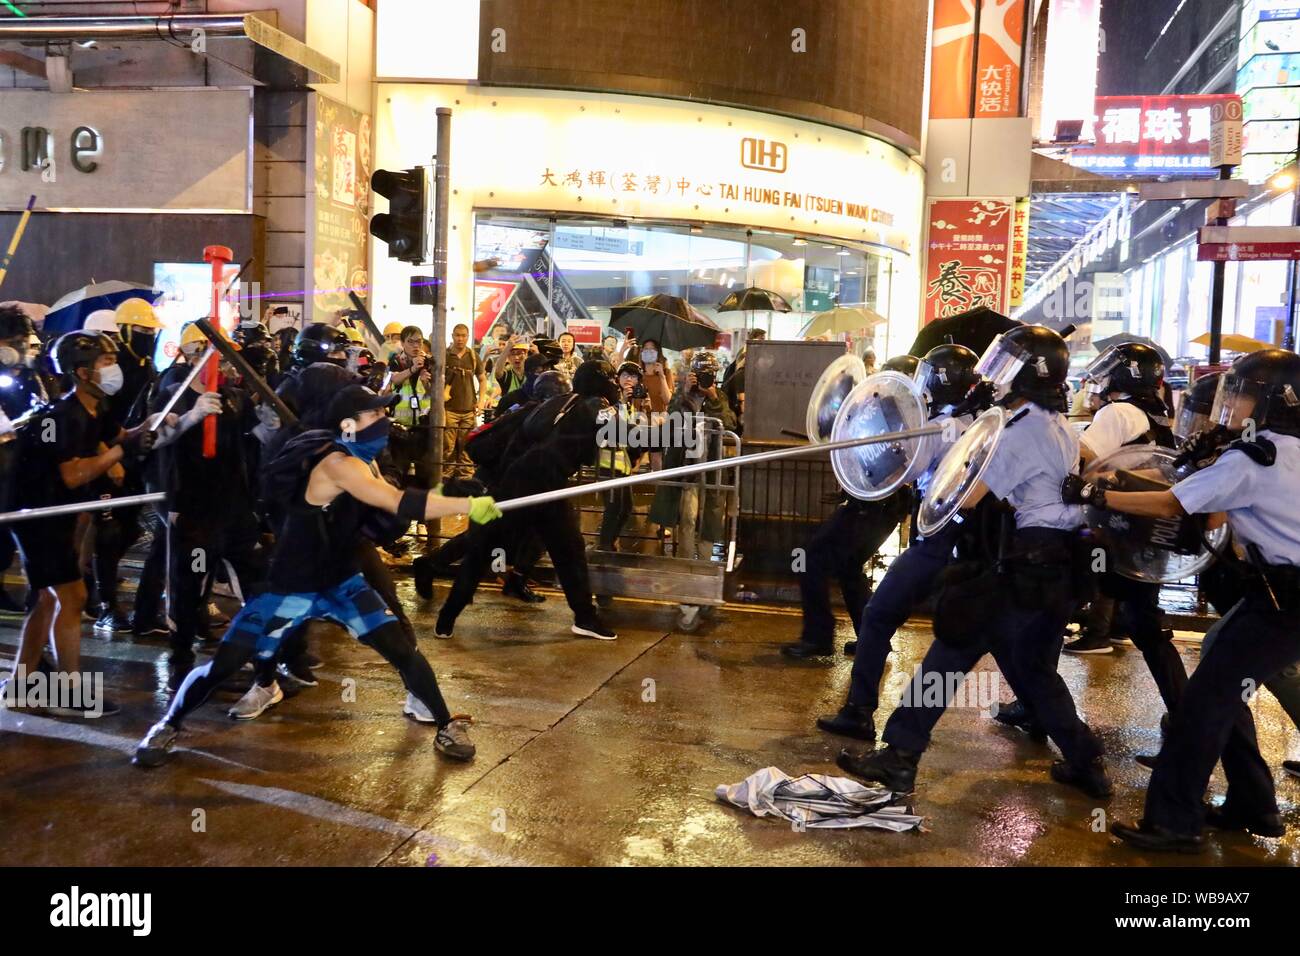 Hong Kong, New Territories of south China's Hong Kong. 25th Aug, 2019. Radical protesters attack police officers in Tsuen Wan, in the western New Territories of south China's Hong Kong, Aug. 25, 2019. Radical protesters block various roads, hurl bricks and stones at police officers in the protest. Credit: Lui Siu Wai/Xinhua/Alamy Live News Stock Photo